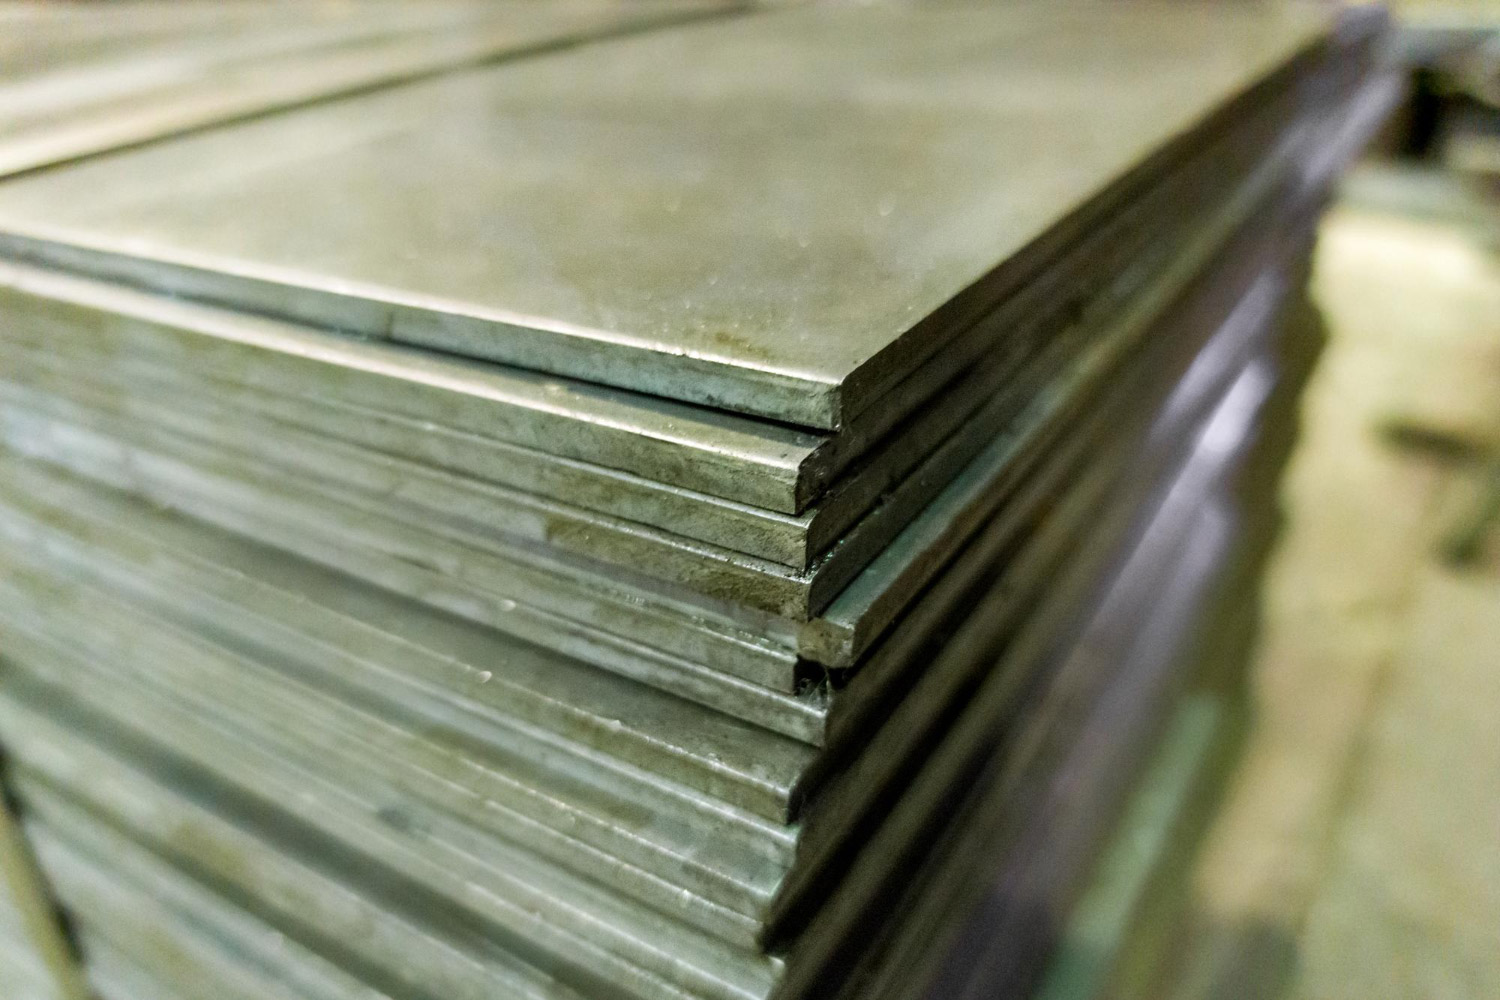 cold-rolled-steel-sheets-stack-corner-closeup